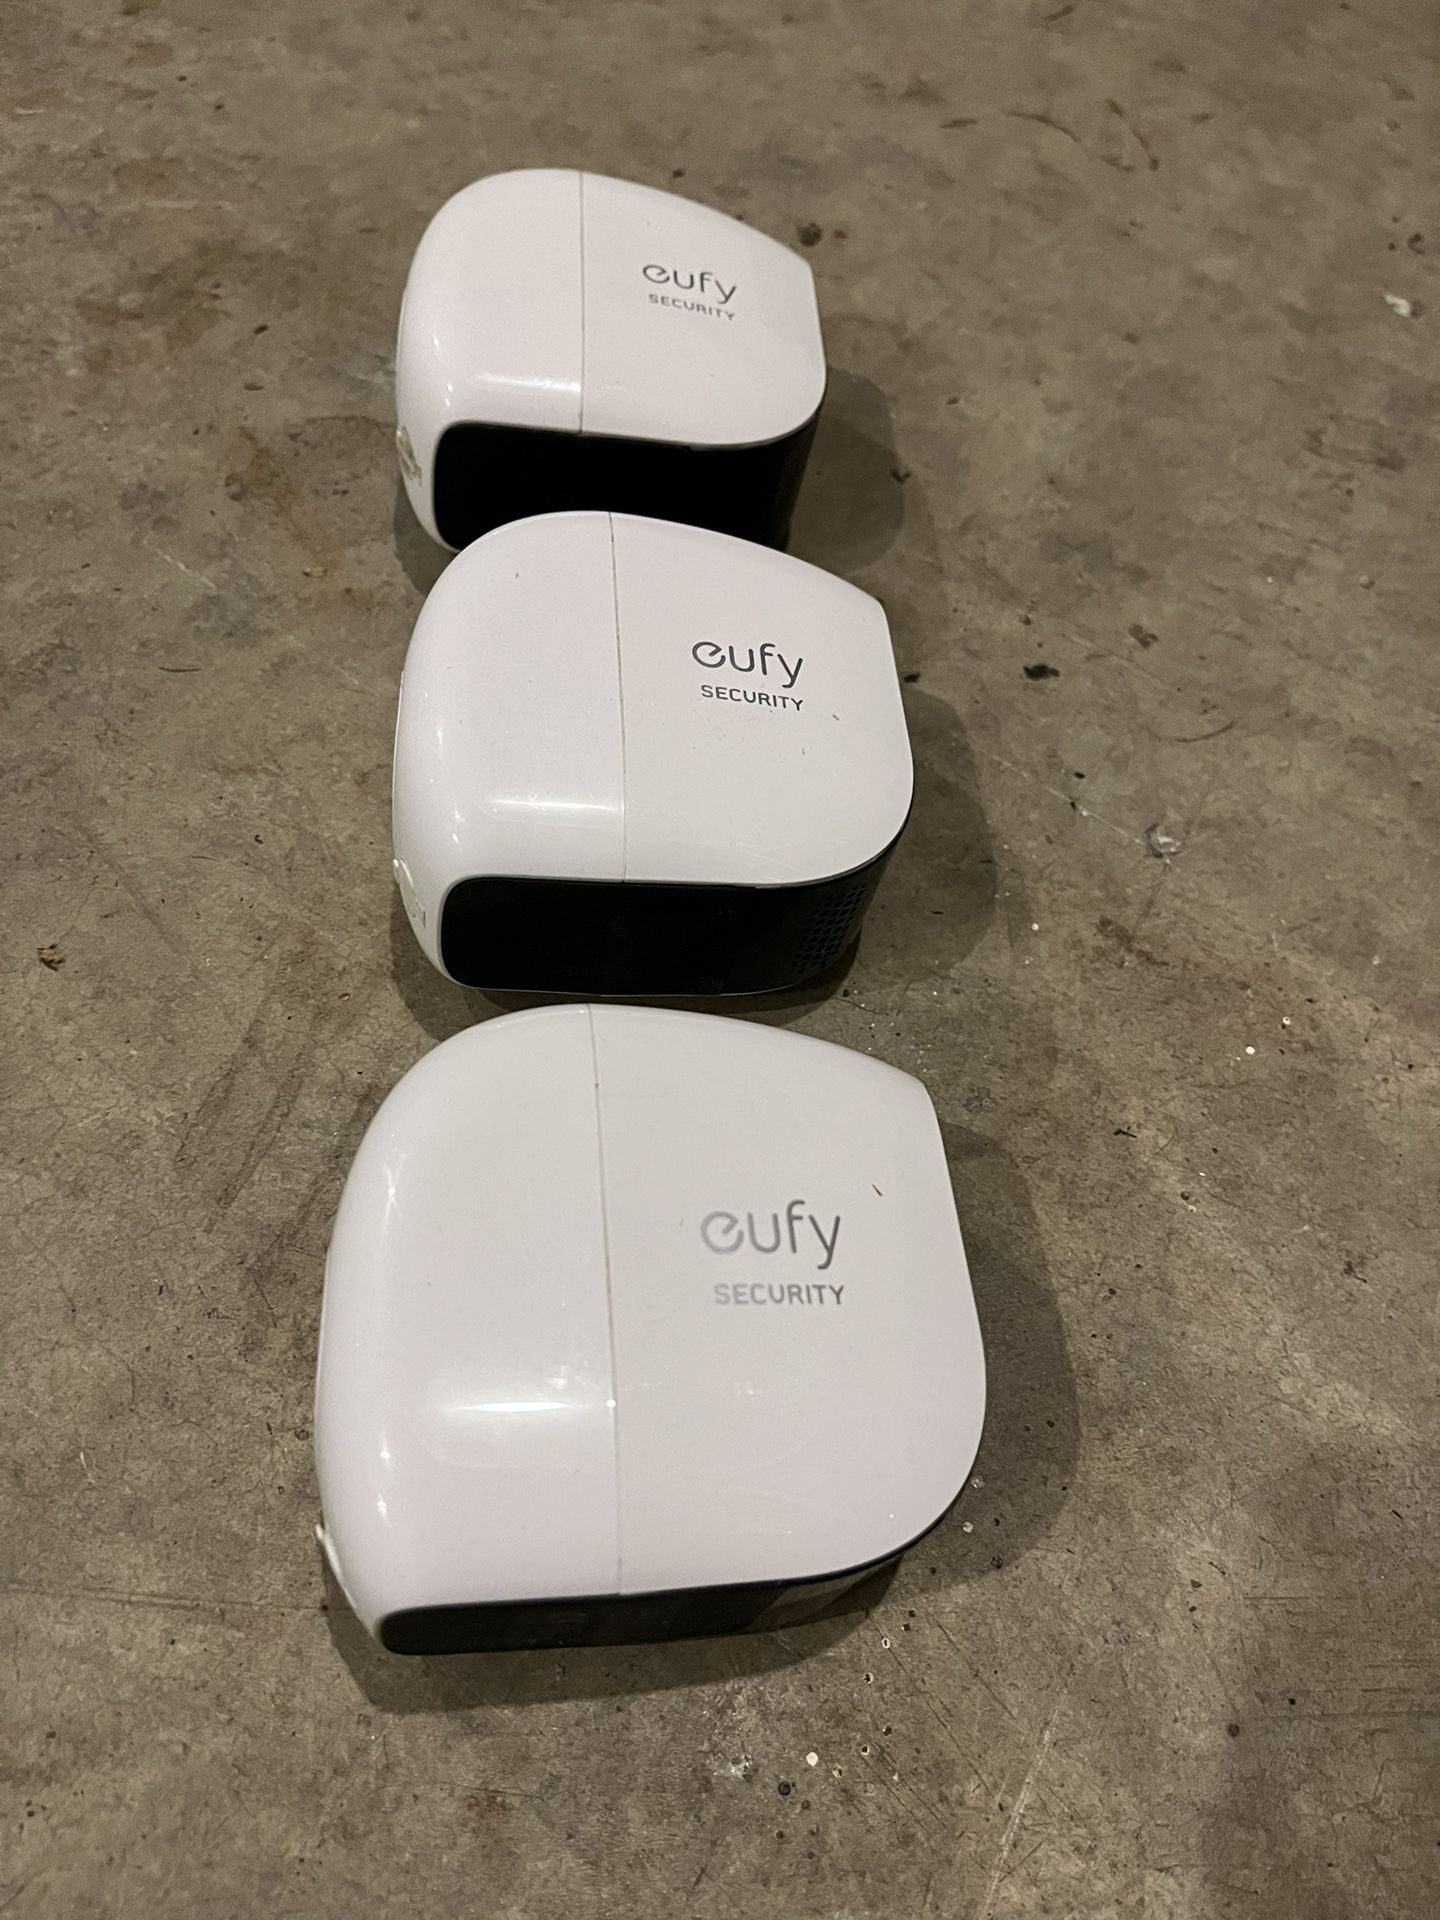 Eufy Outdoor Security Cameras Model E (Mounting Equipment, Charger And Homebase Not Included)